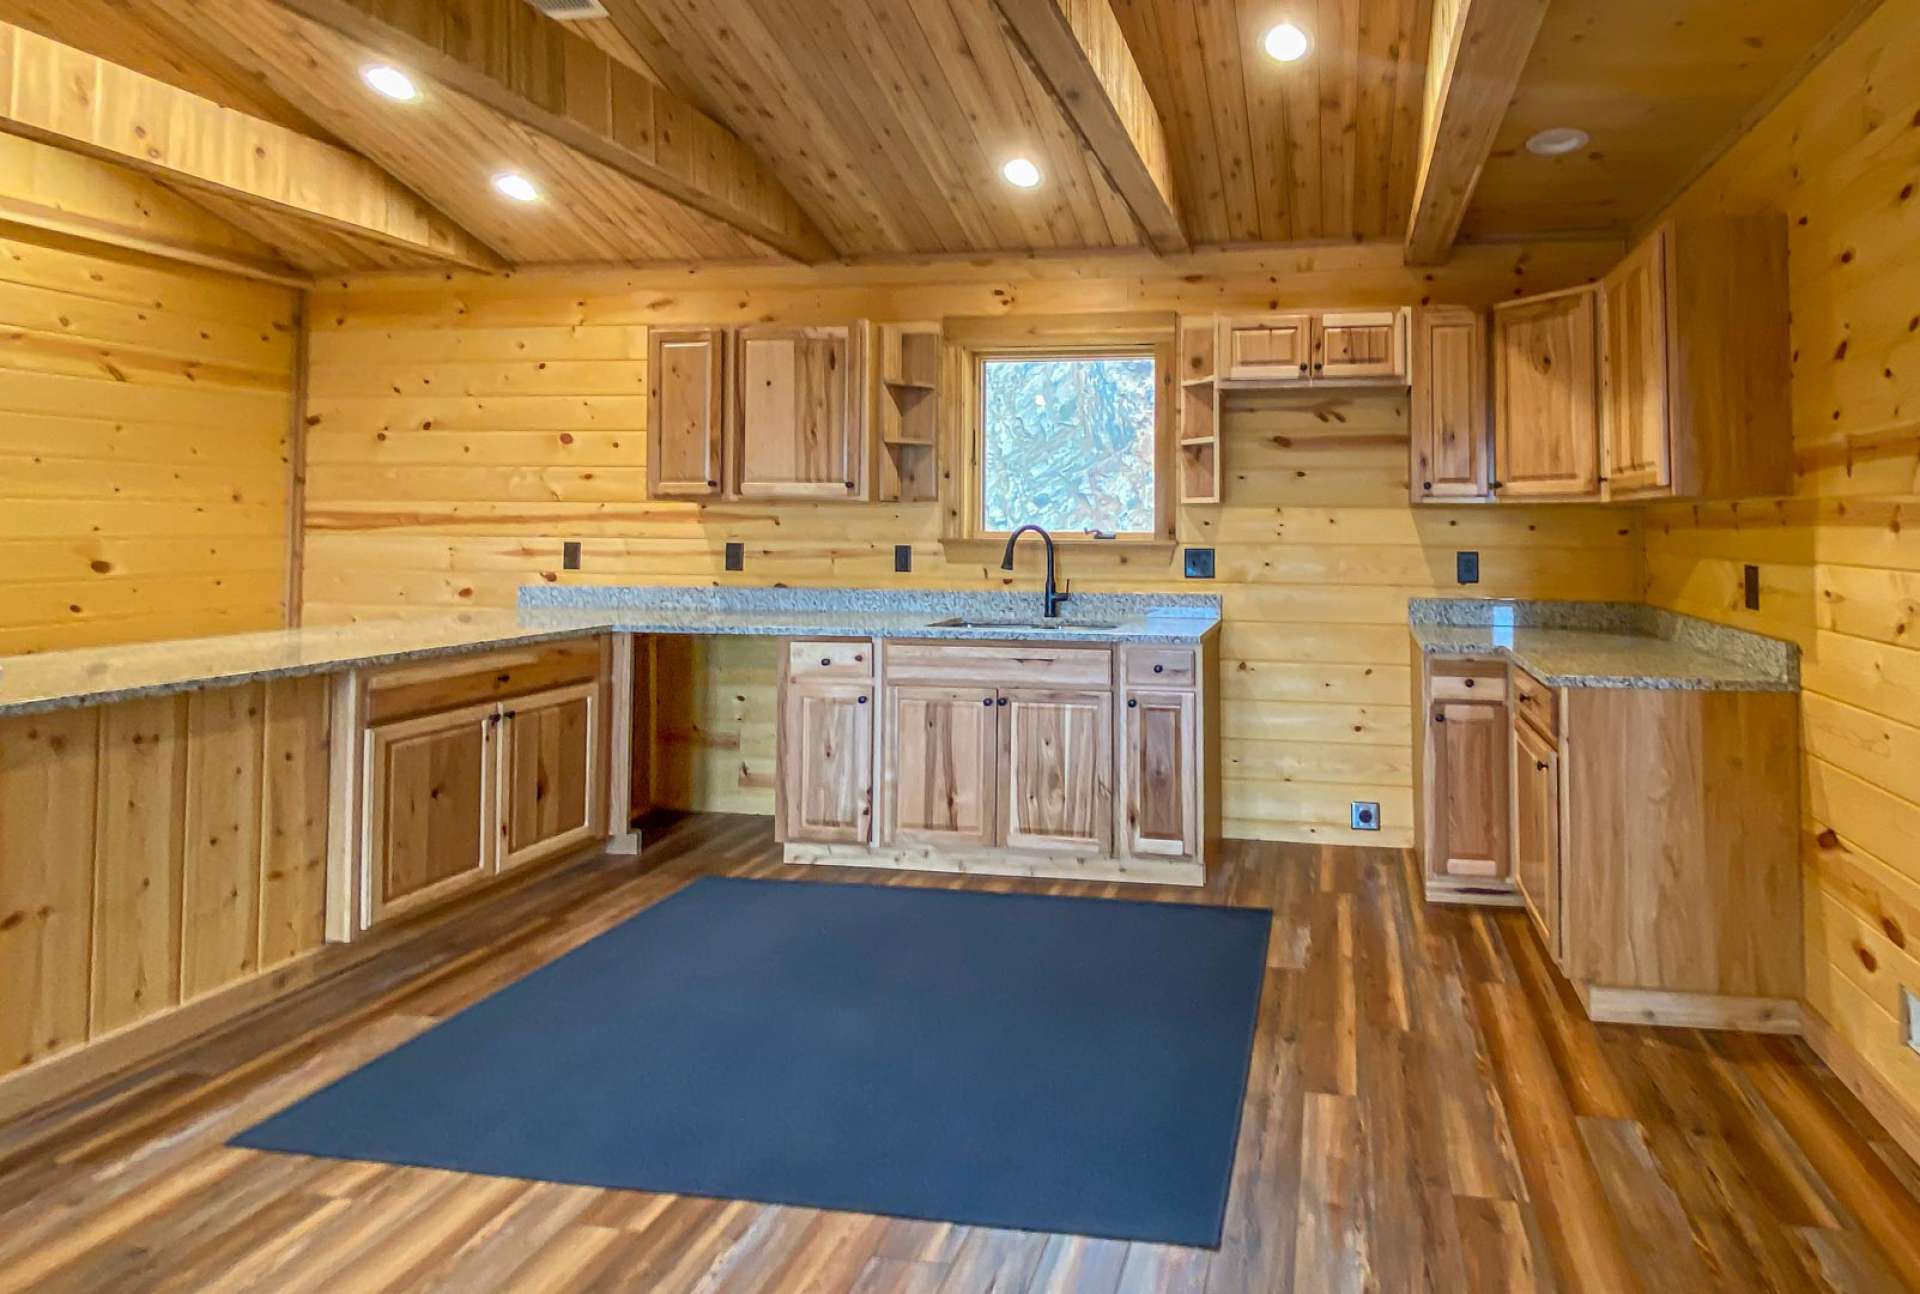 As you walk in the front door of the home the kitchen area will be on the left and the living area to your right.  The kitchen features granite countertops with custom built island that provides abundant seating and hickory cabinetry in both the main cabin and guest cabin.